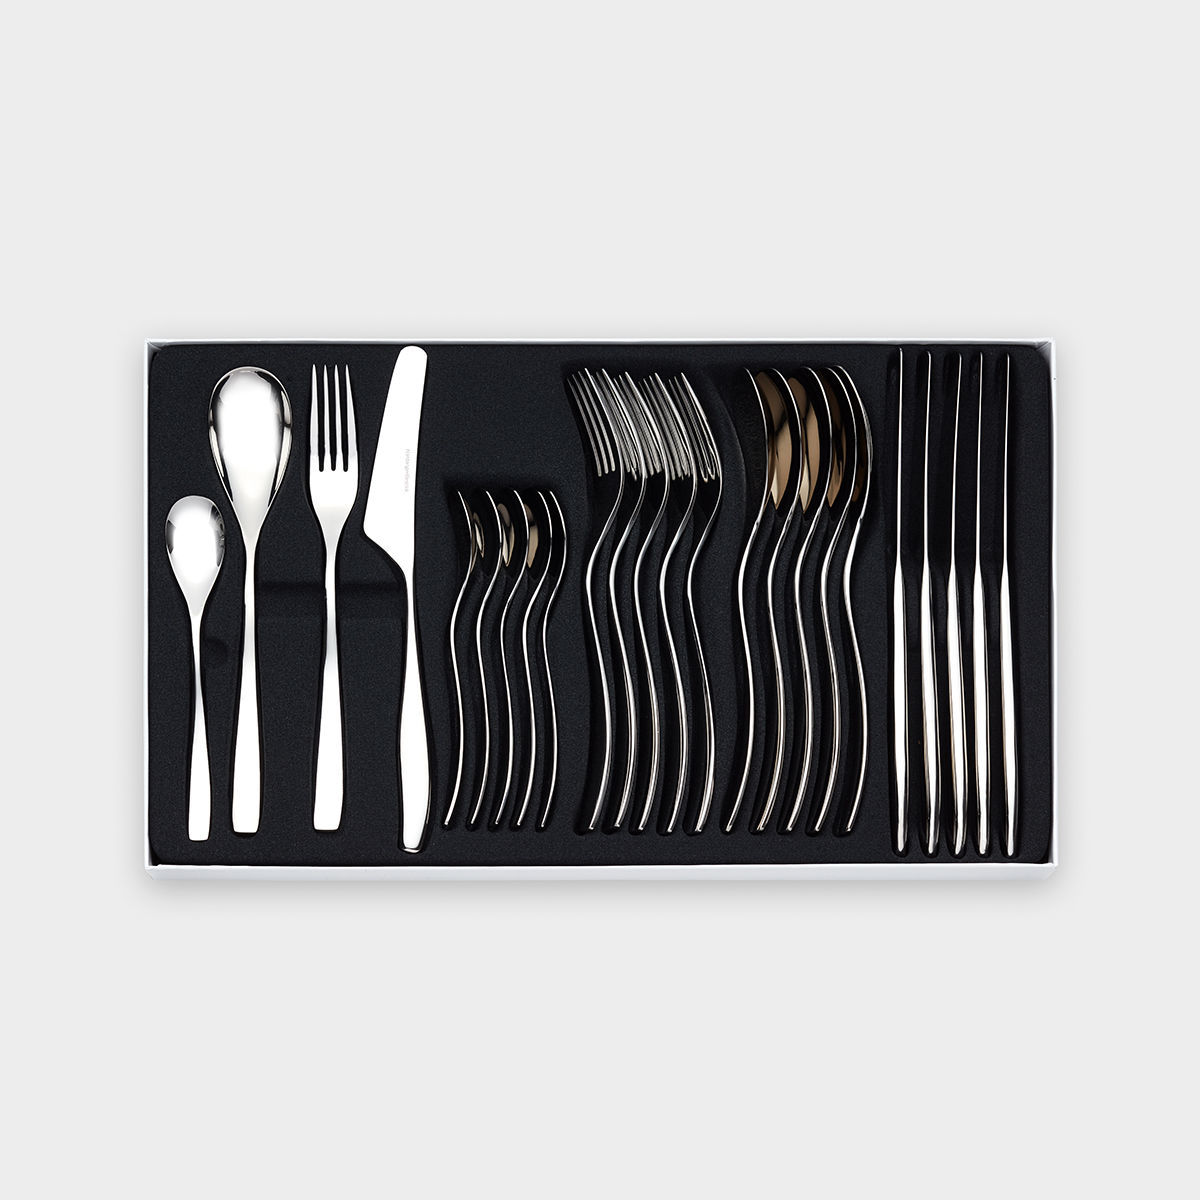 Julie cutlery set 24 pieces product image